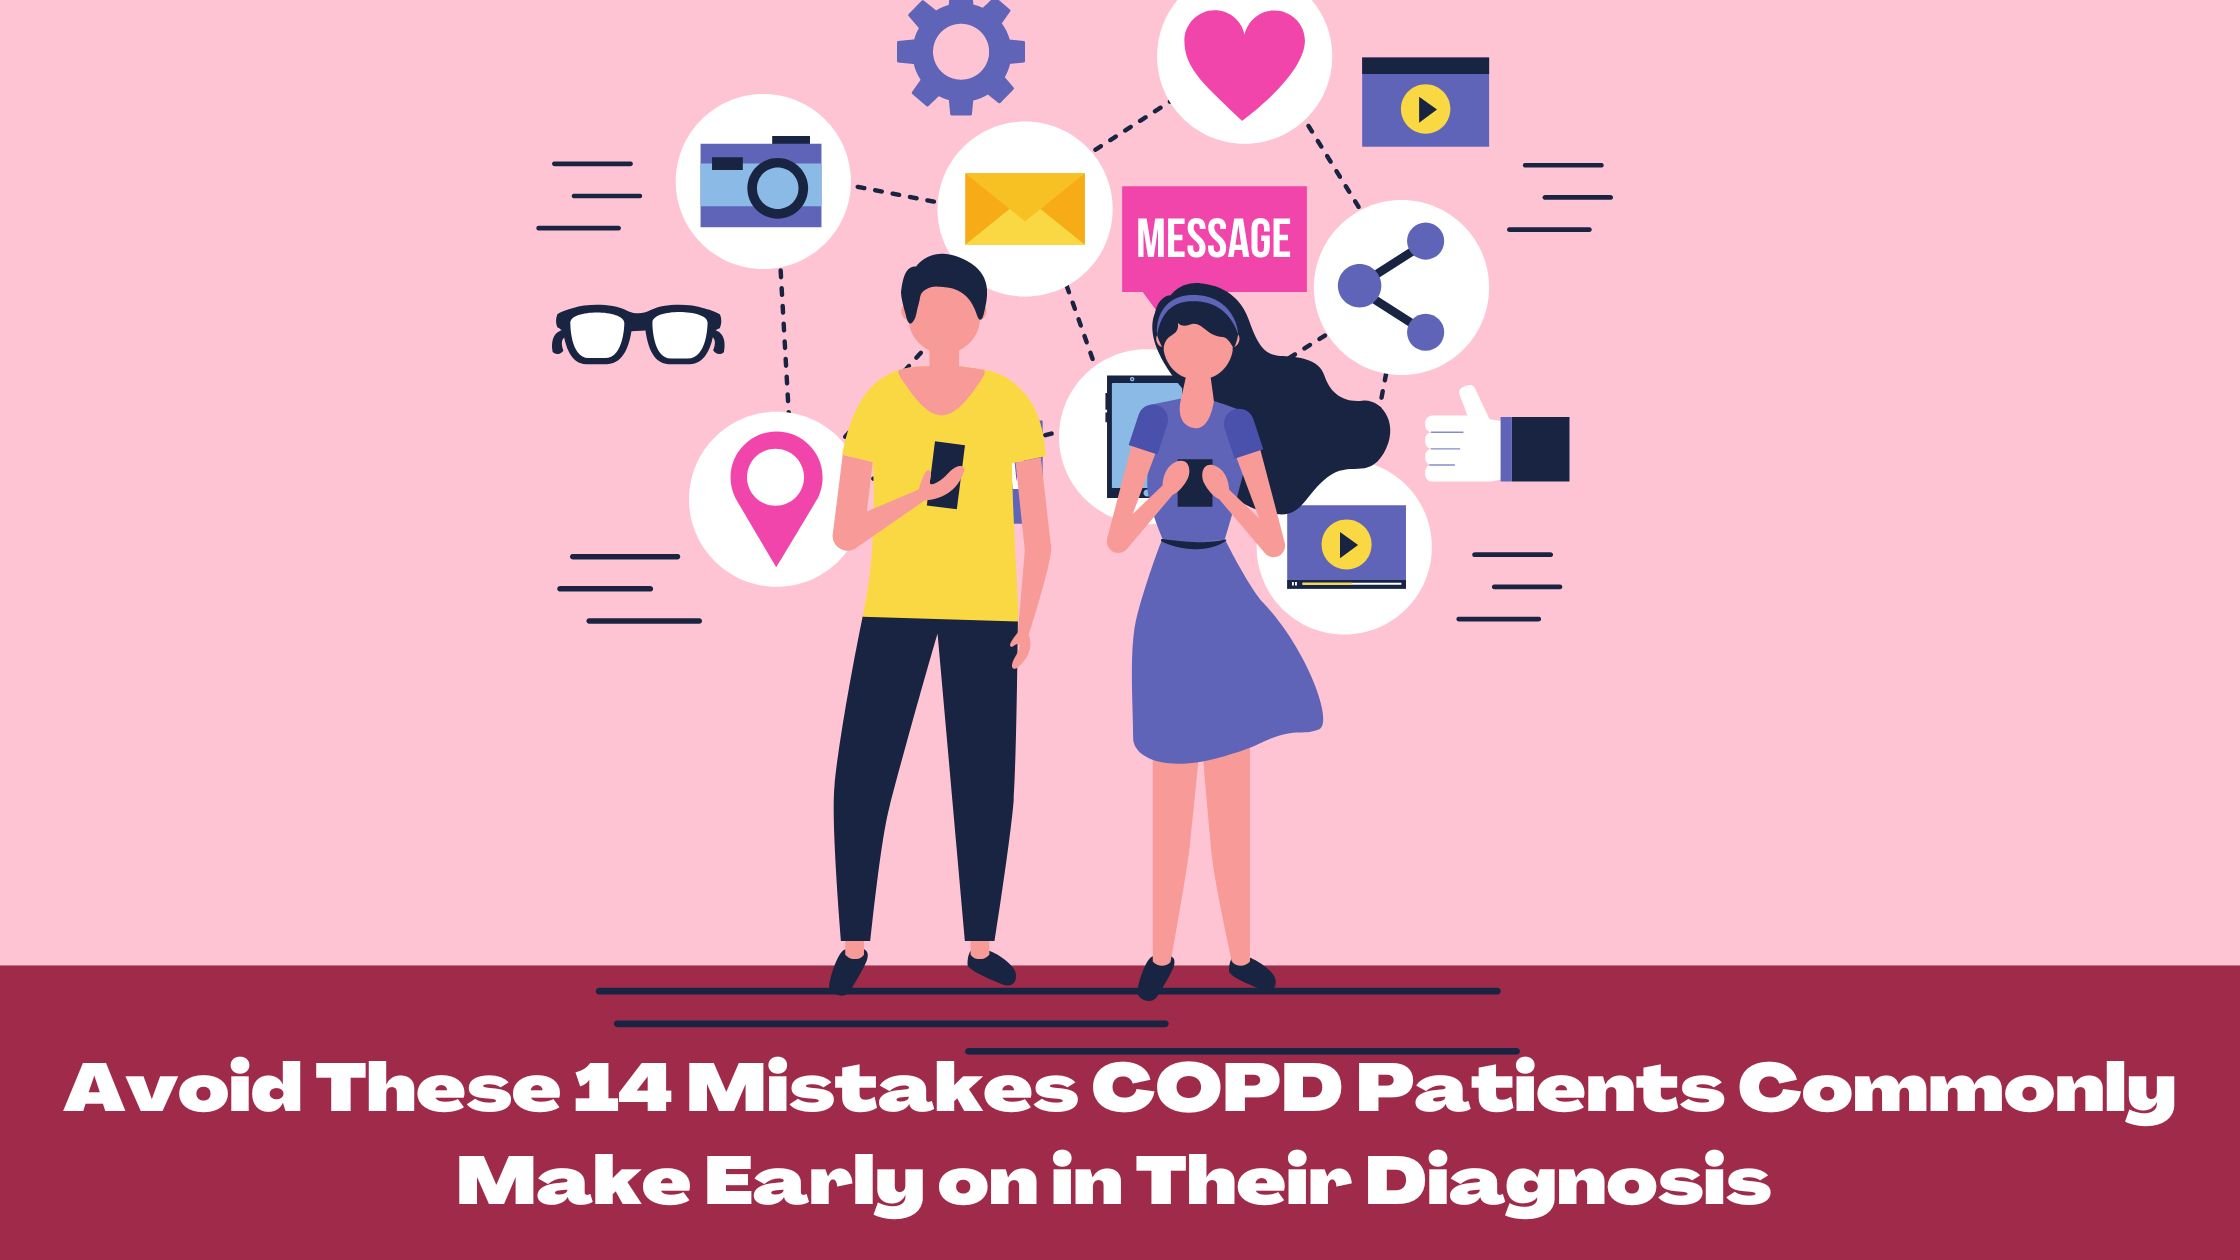 Avoid These 14 Mistakes COPD Patients Commonly Make Early on in Their Diagnosis